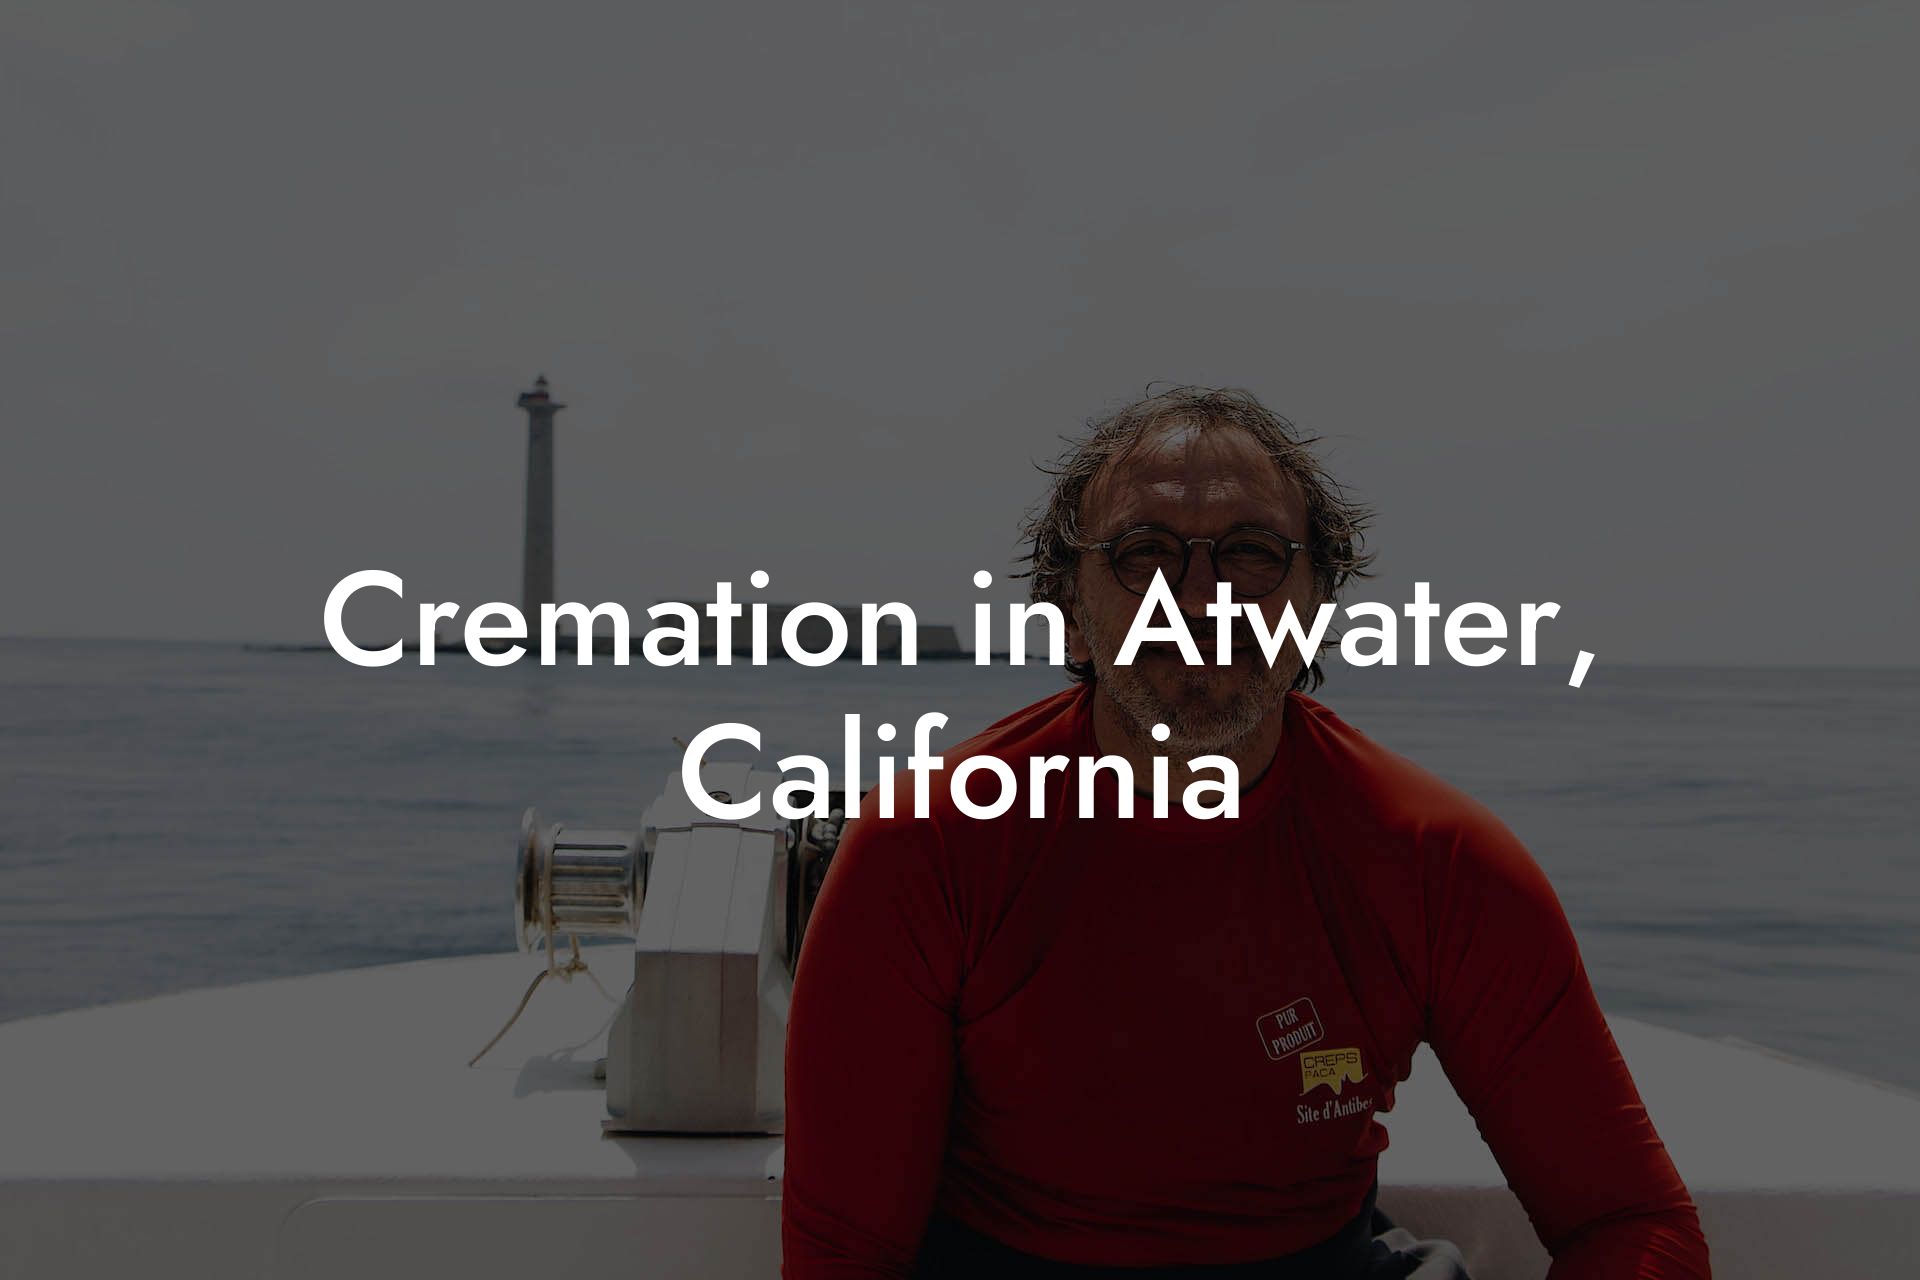 Cremation in Atwater, California